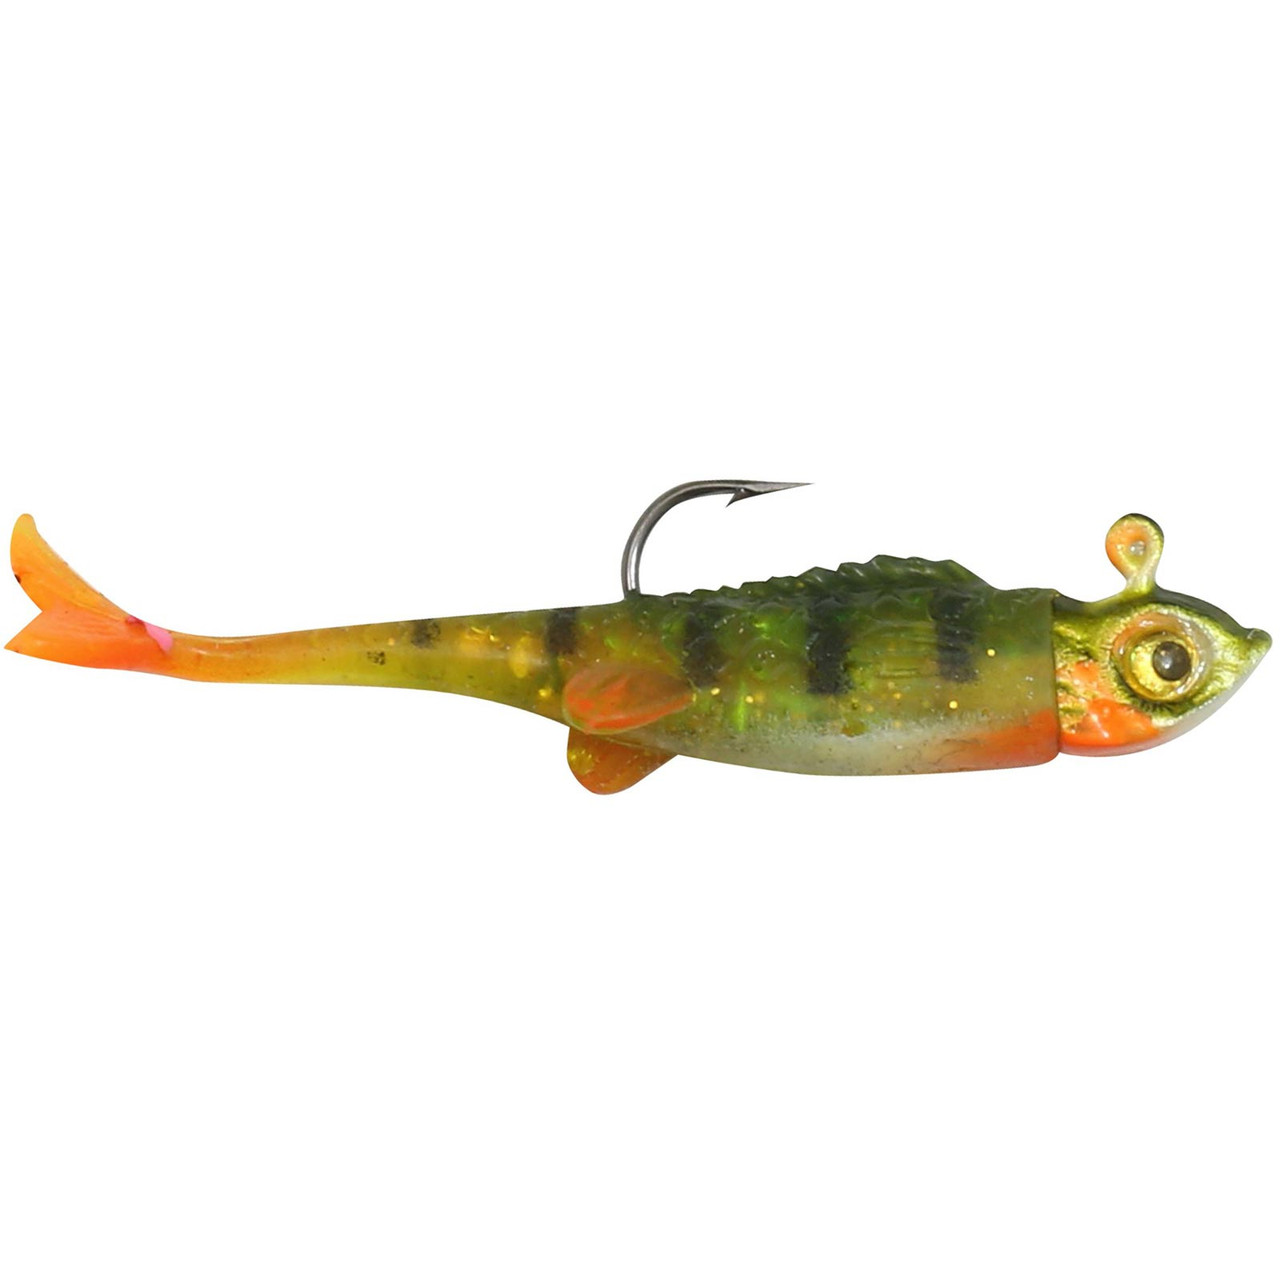 Northland Tackle Mimic Minnow Spin, Spin Jig and Tail, Freshwater